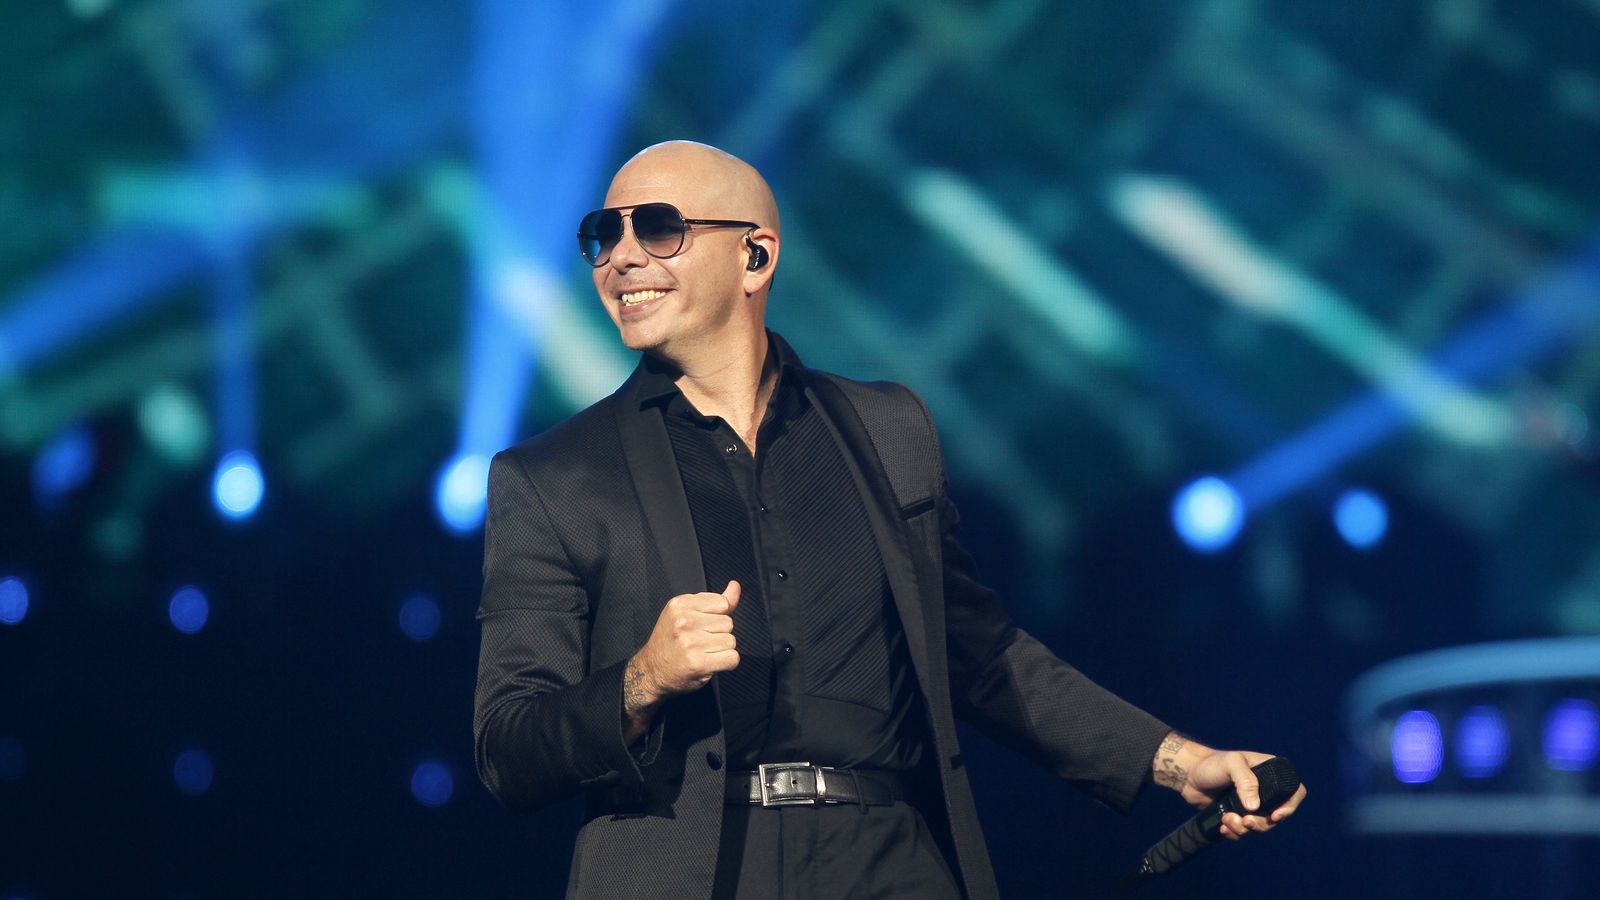 Pitbull is bringing his I Feel Good Tour to Tampa in October